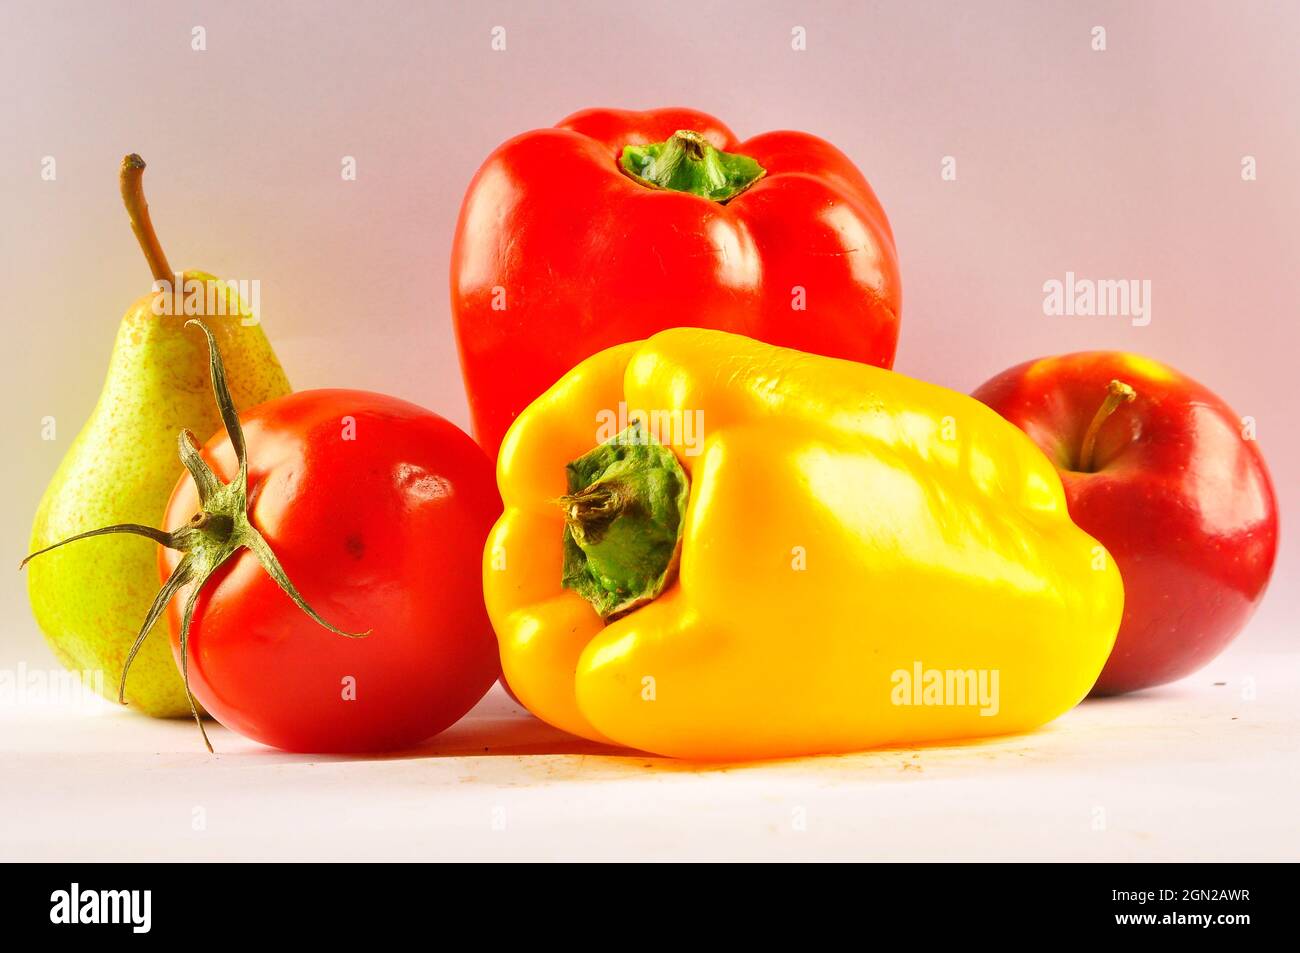 Red pepper, pear and apple on the table Stock Photo